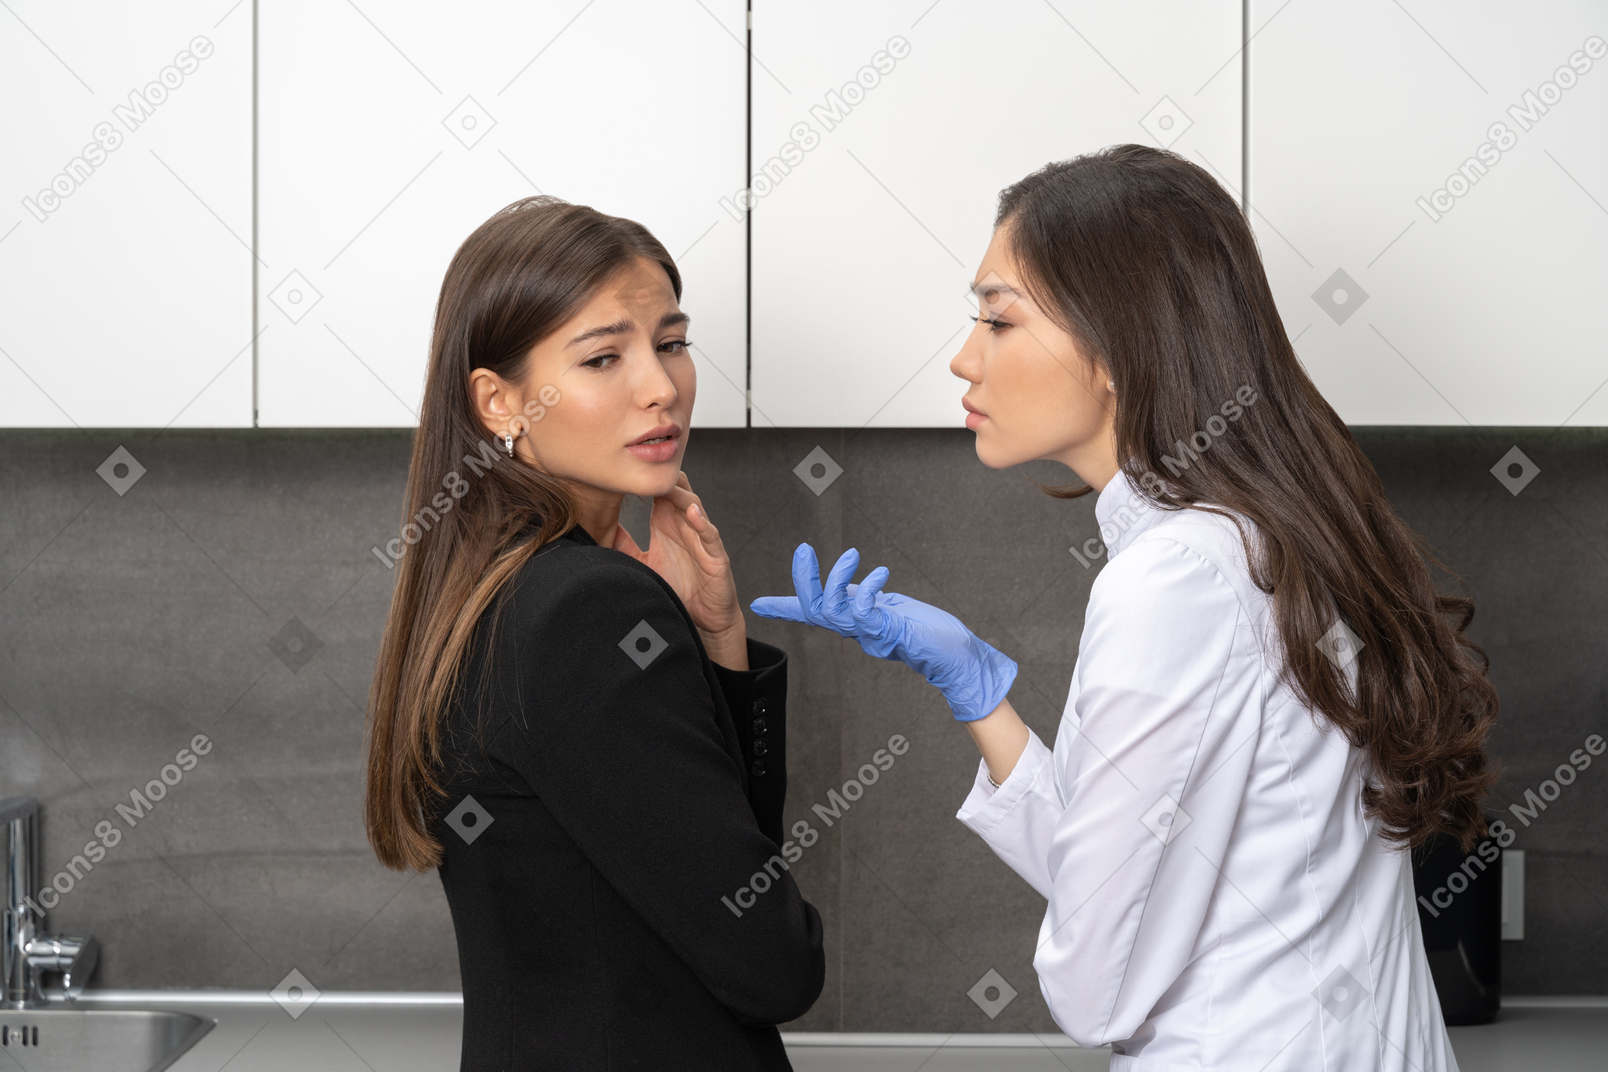 Patient and doctor discussing